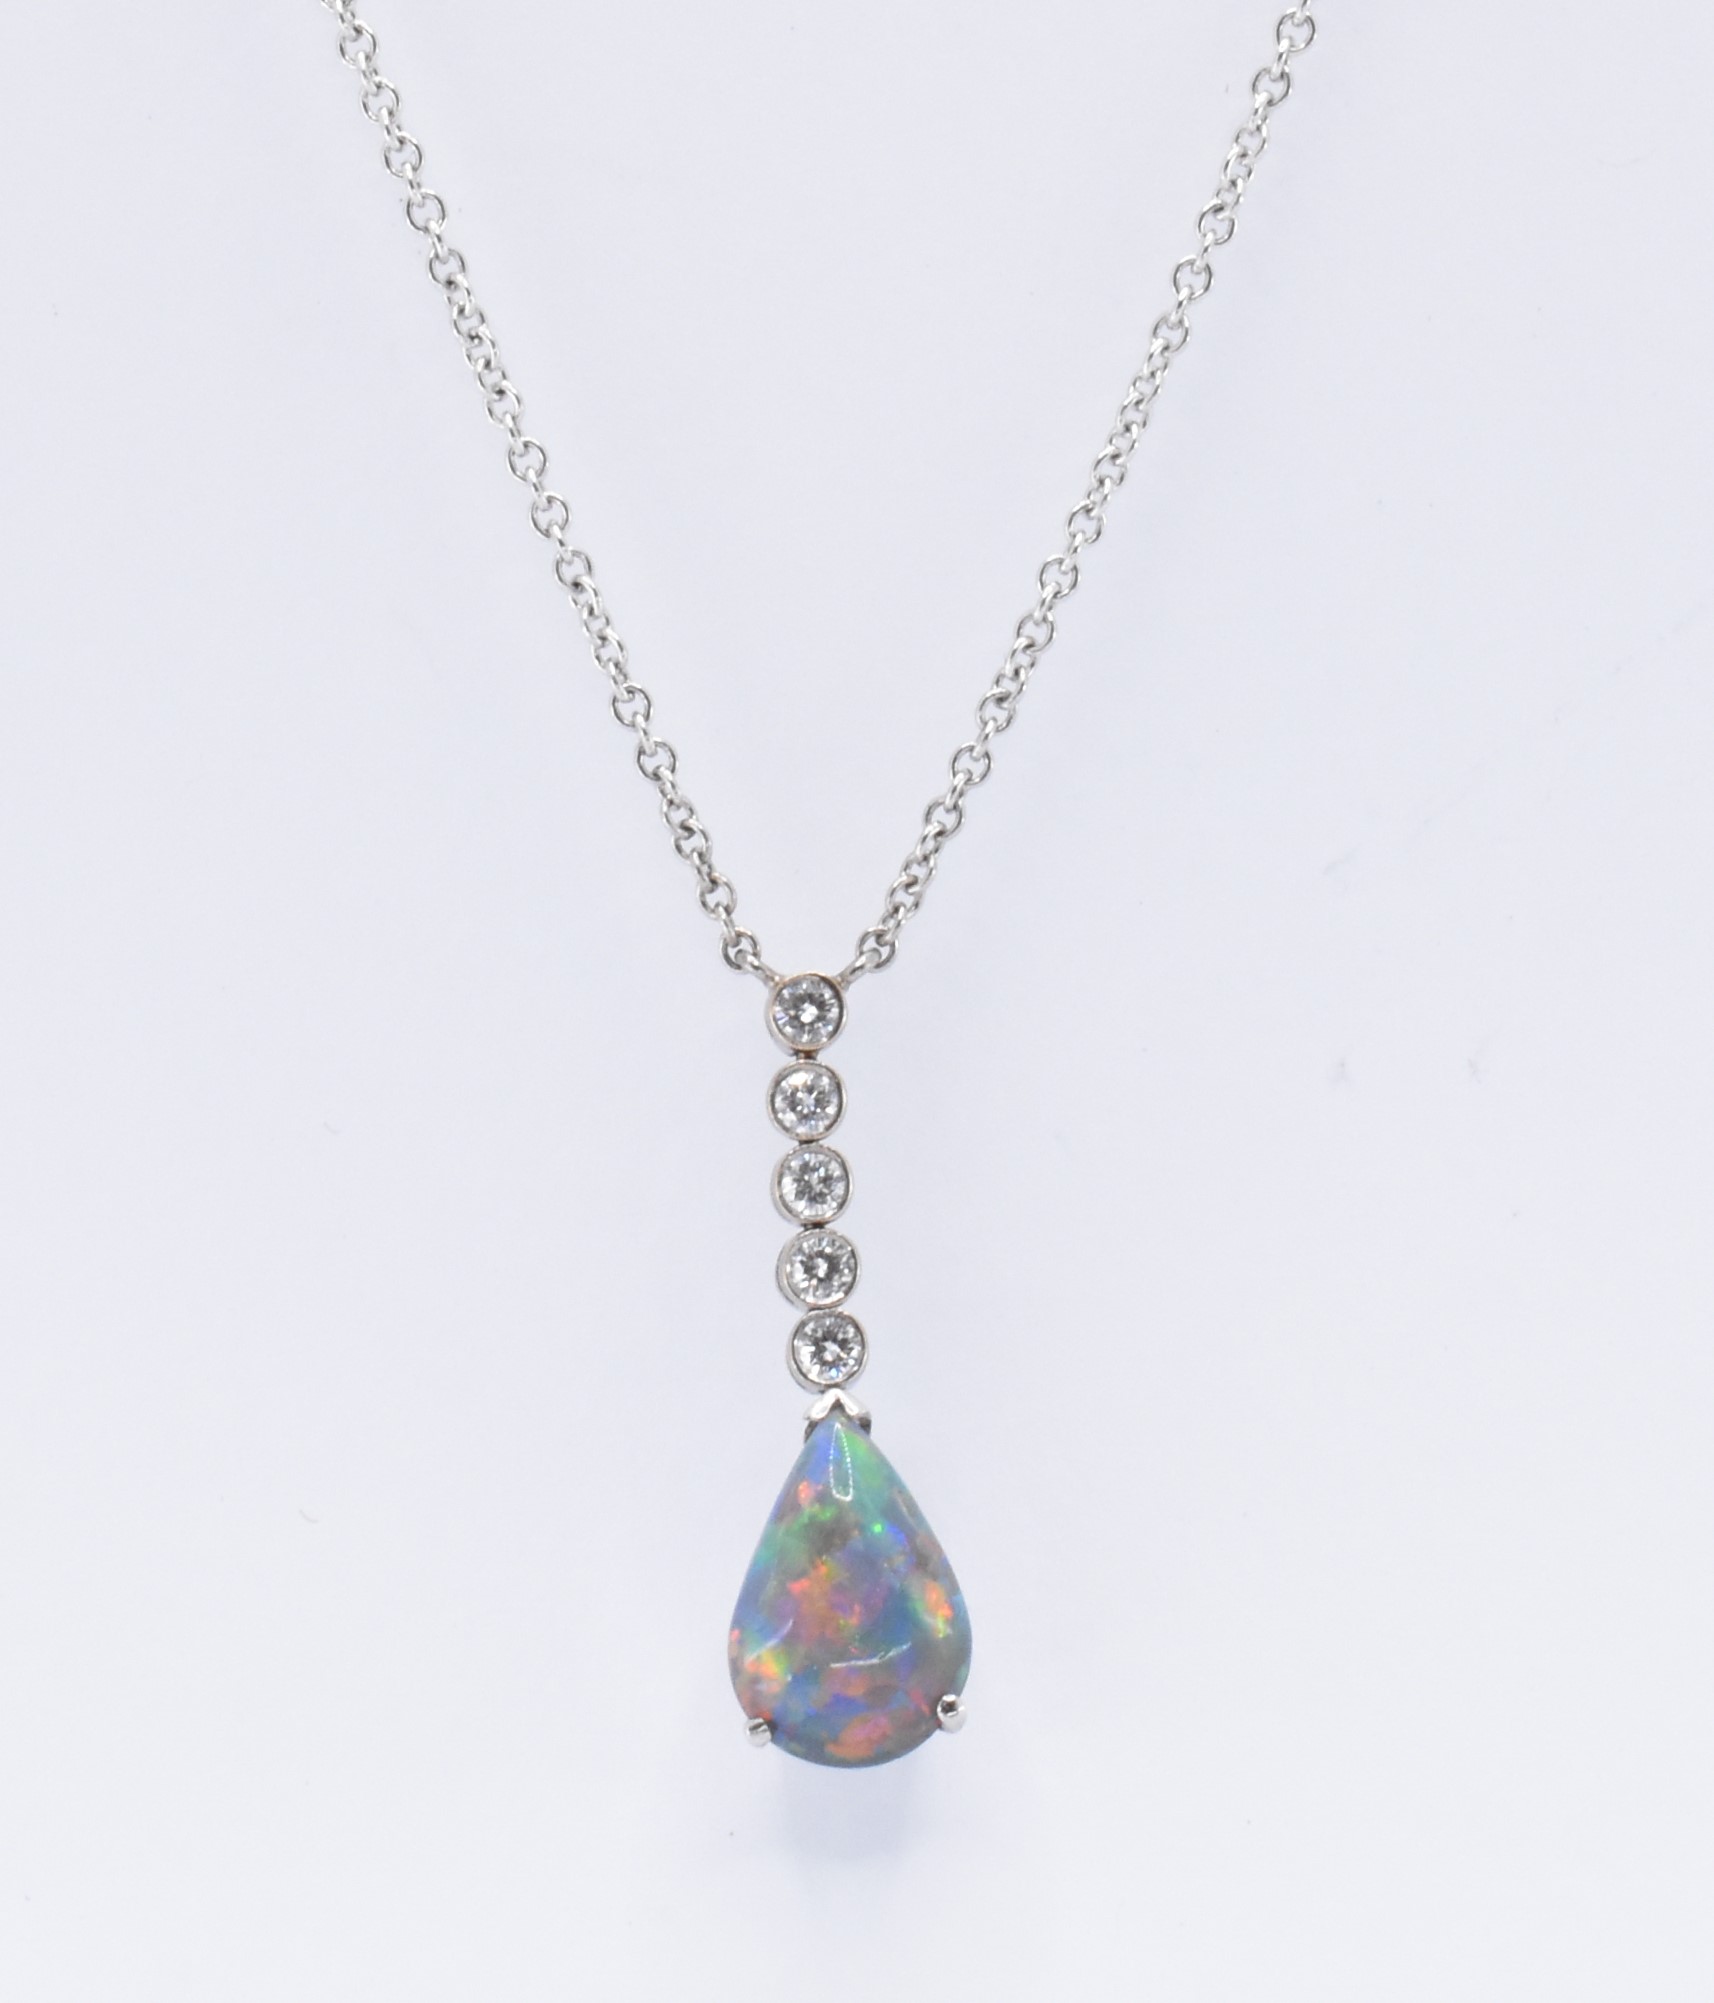 18CT WHITE GOLD OPAL & DIAMOND PENDANT NECKLACE - Image 2 of 8